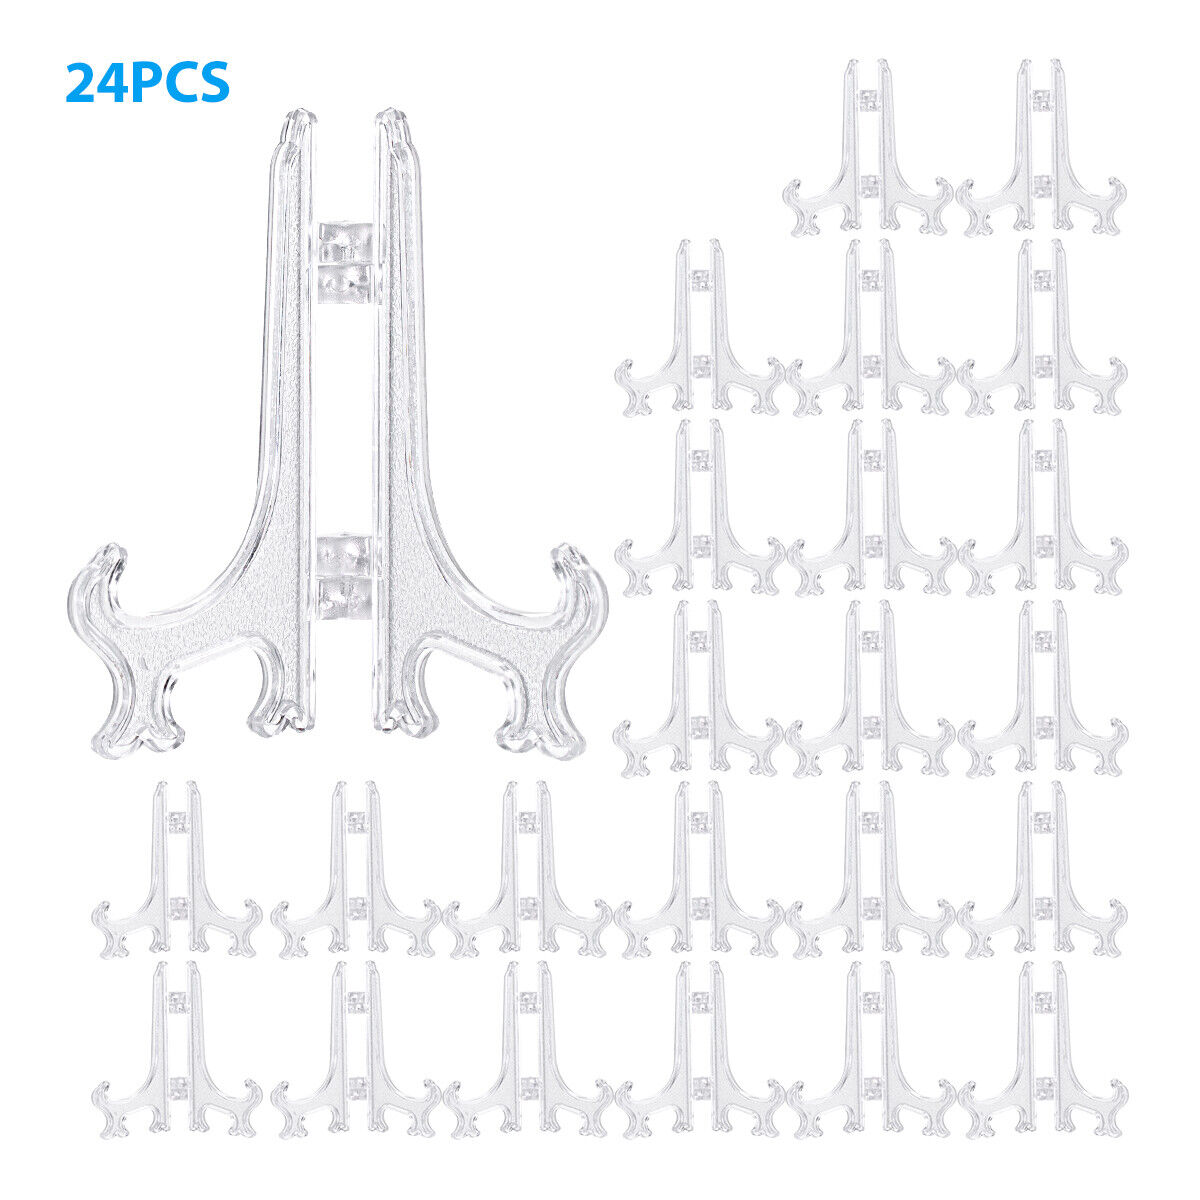 24-Pack Plastic Easel Display Stand Plate Holders for Photo Dish Art Unbranded Does not apply